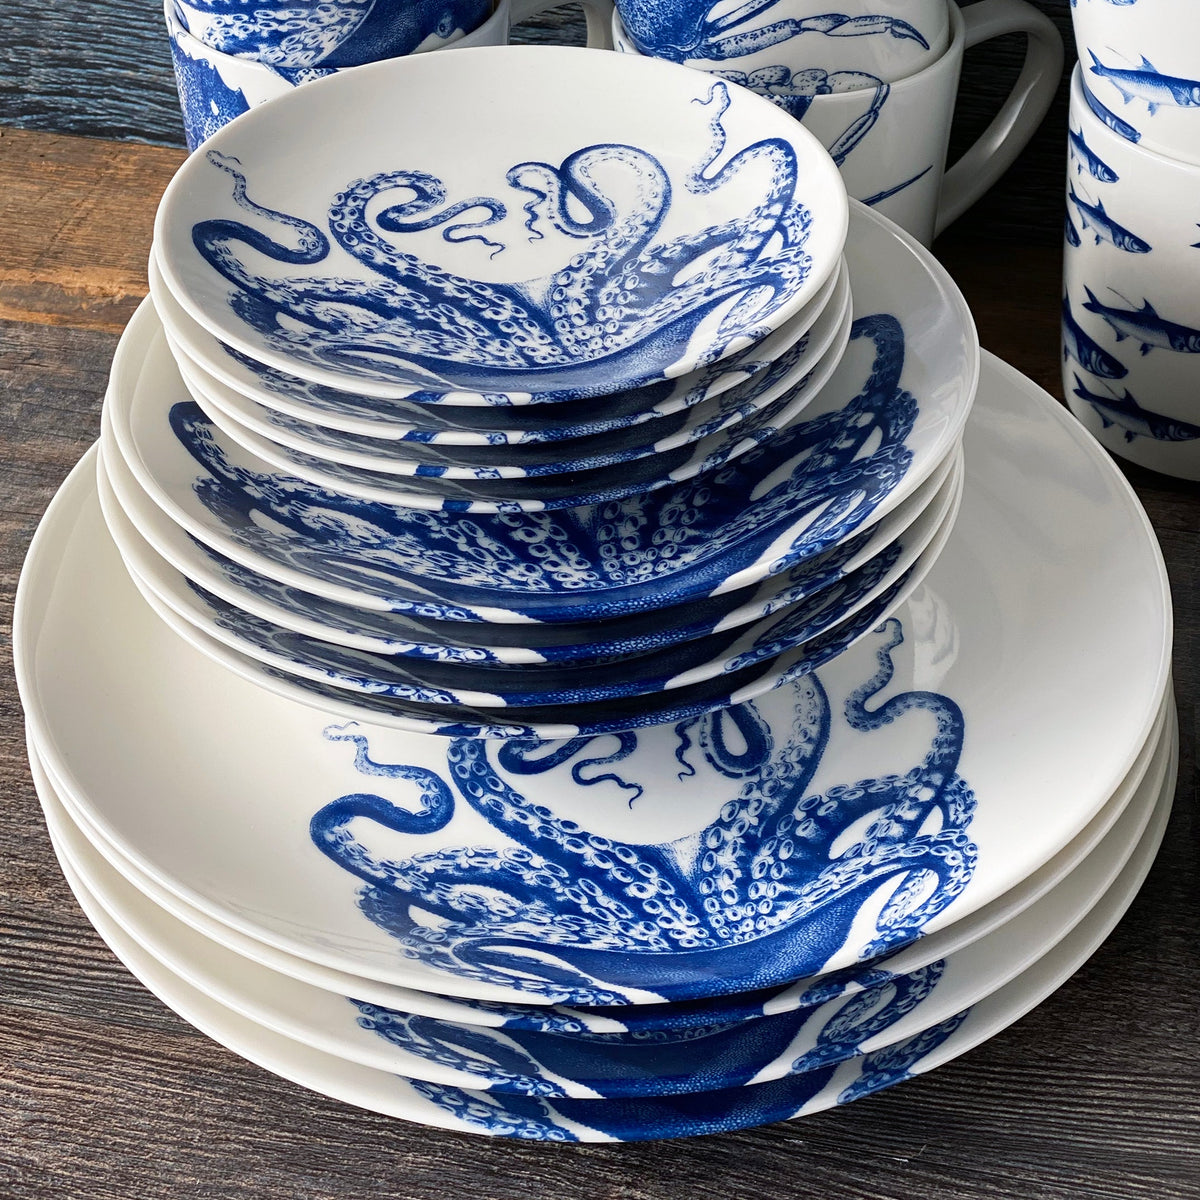 A stack of Lucy Blue Coupe Dinner Plates with intricate octopus designs in shades of blue from the Caskata Artisanal Home brand.